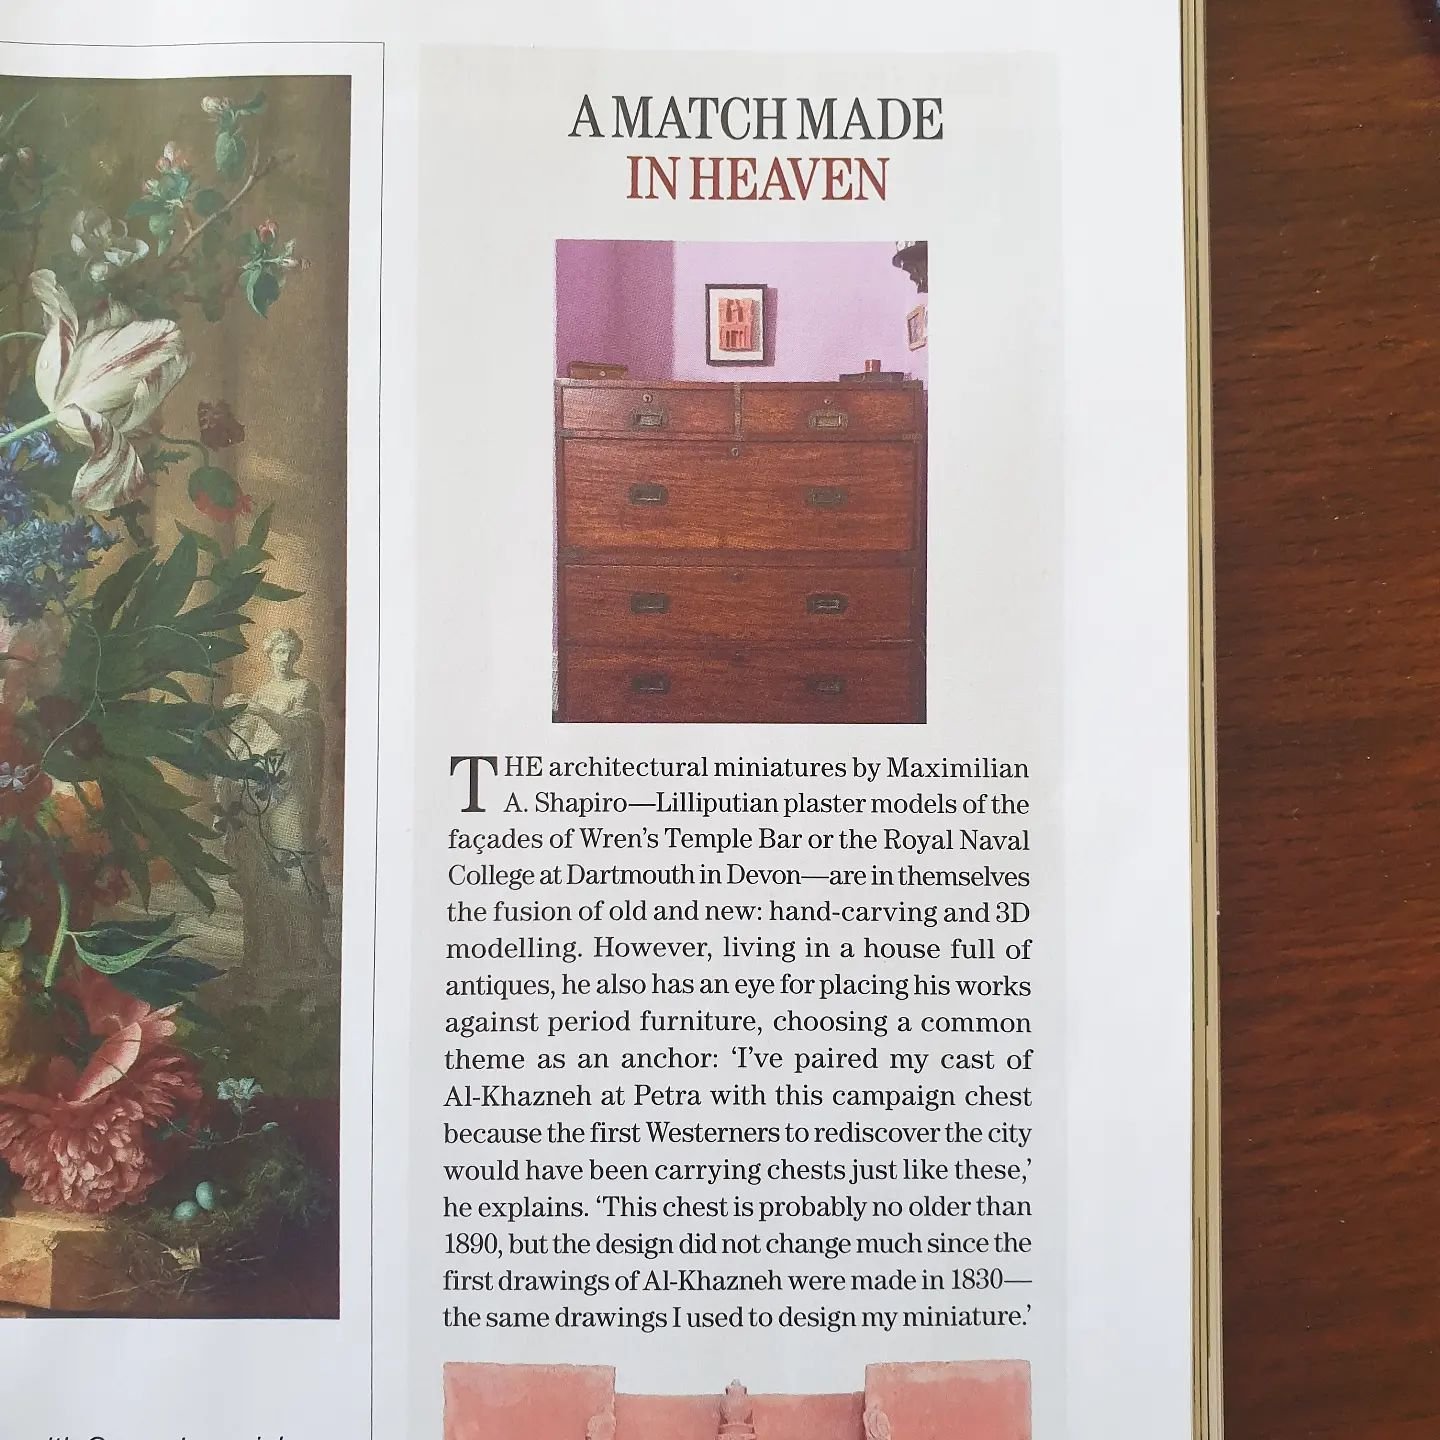 Have you bought Country Life today?!

If so, then you will see my work in the Arts and Antiques section.  I am extremely proud to have been selected to be part of this august publication!  Many thanks to Carla Passino for the writeup.

Petra is still